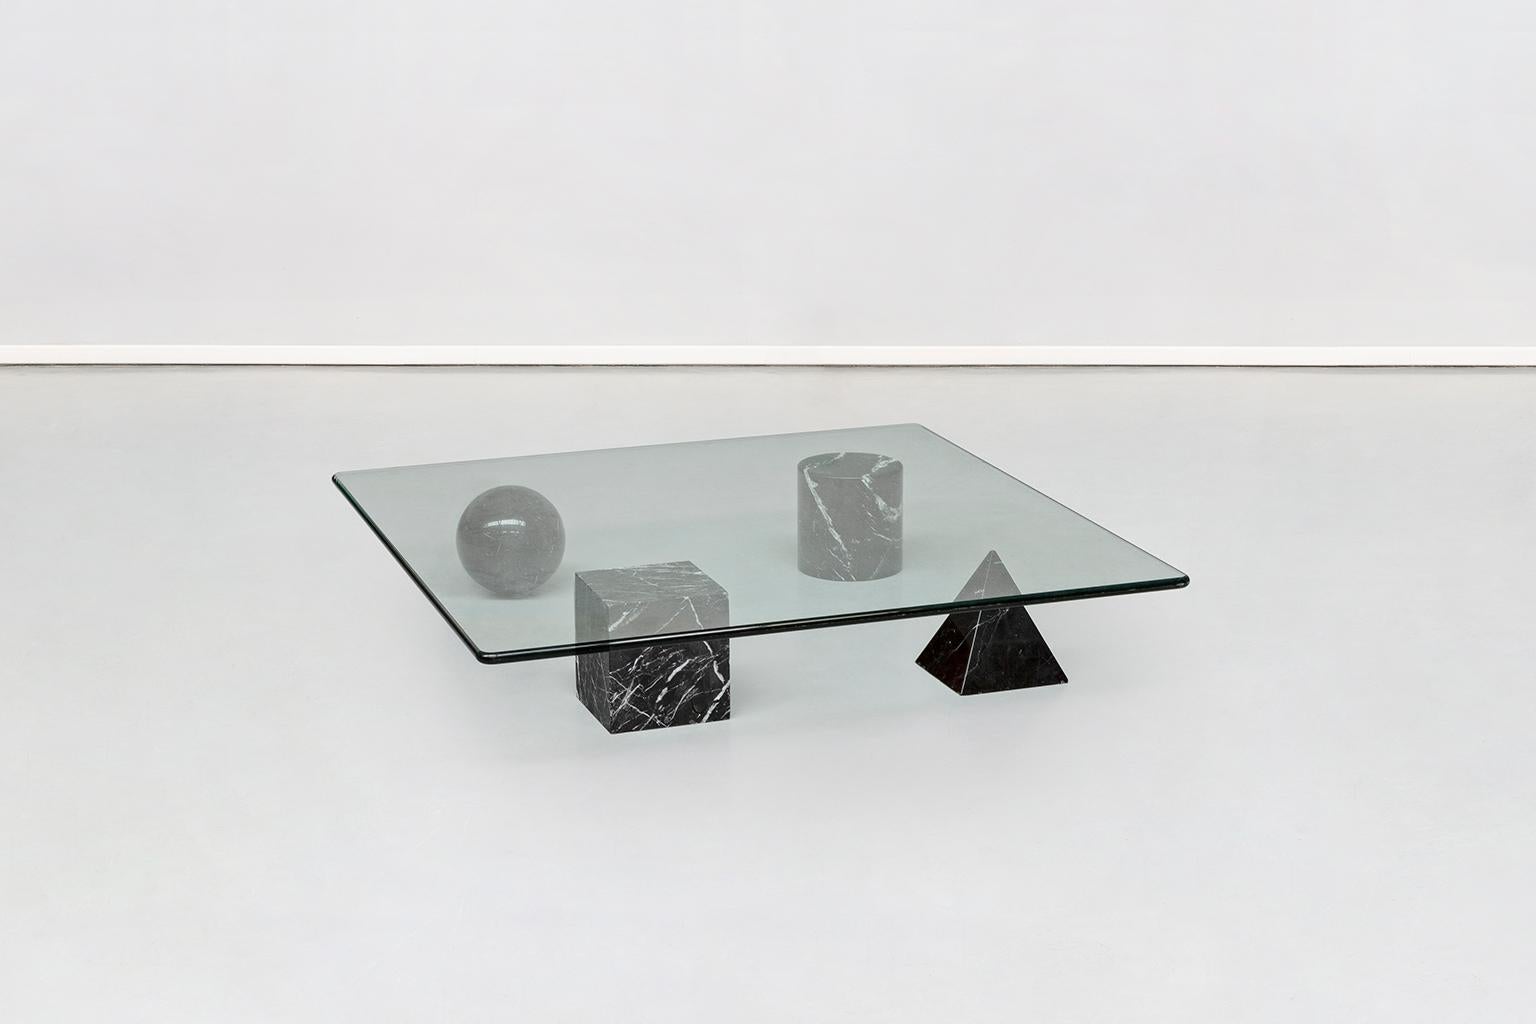 Italian sculptural Metafora coffee table by Vignelli for Martinelli Luce, 1979
A stunning and sculptural coffee table inspired by the four forms of Euclidean geometry, the cube, the pyramid, the cylinder and the sphere. The four elements can be